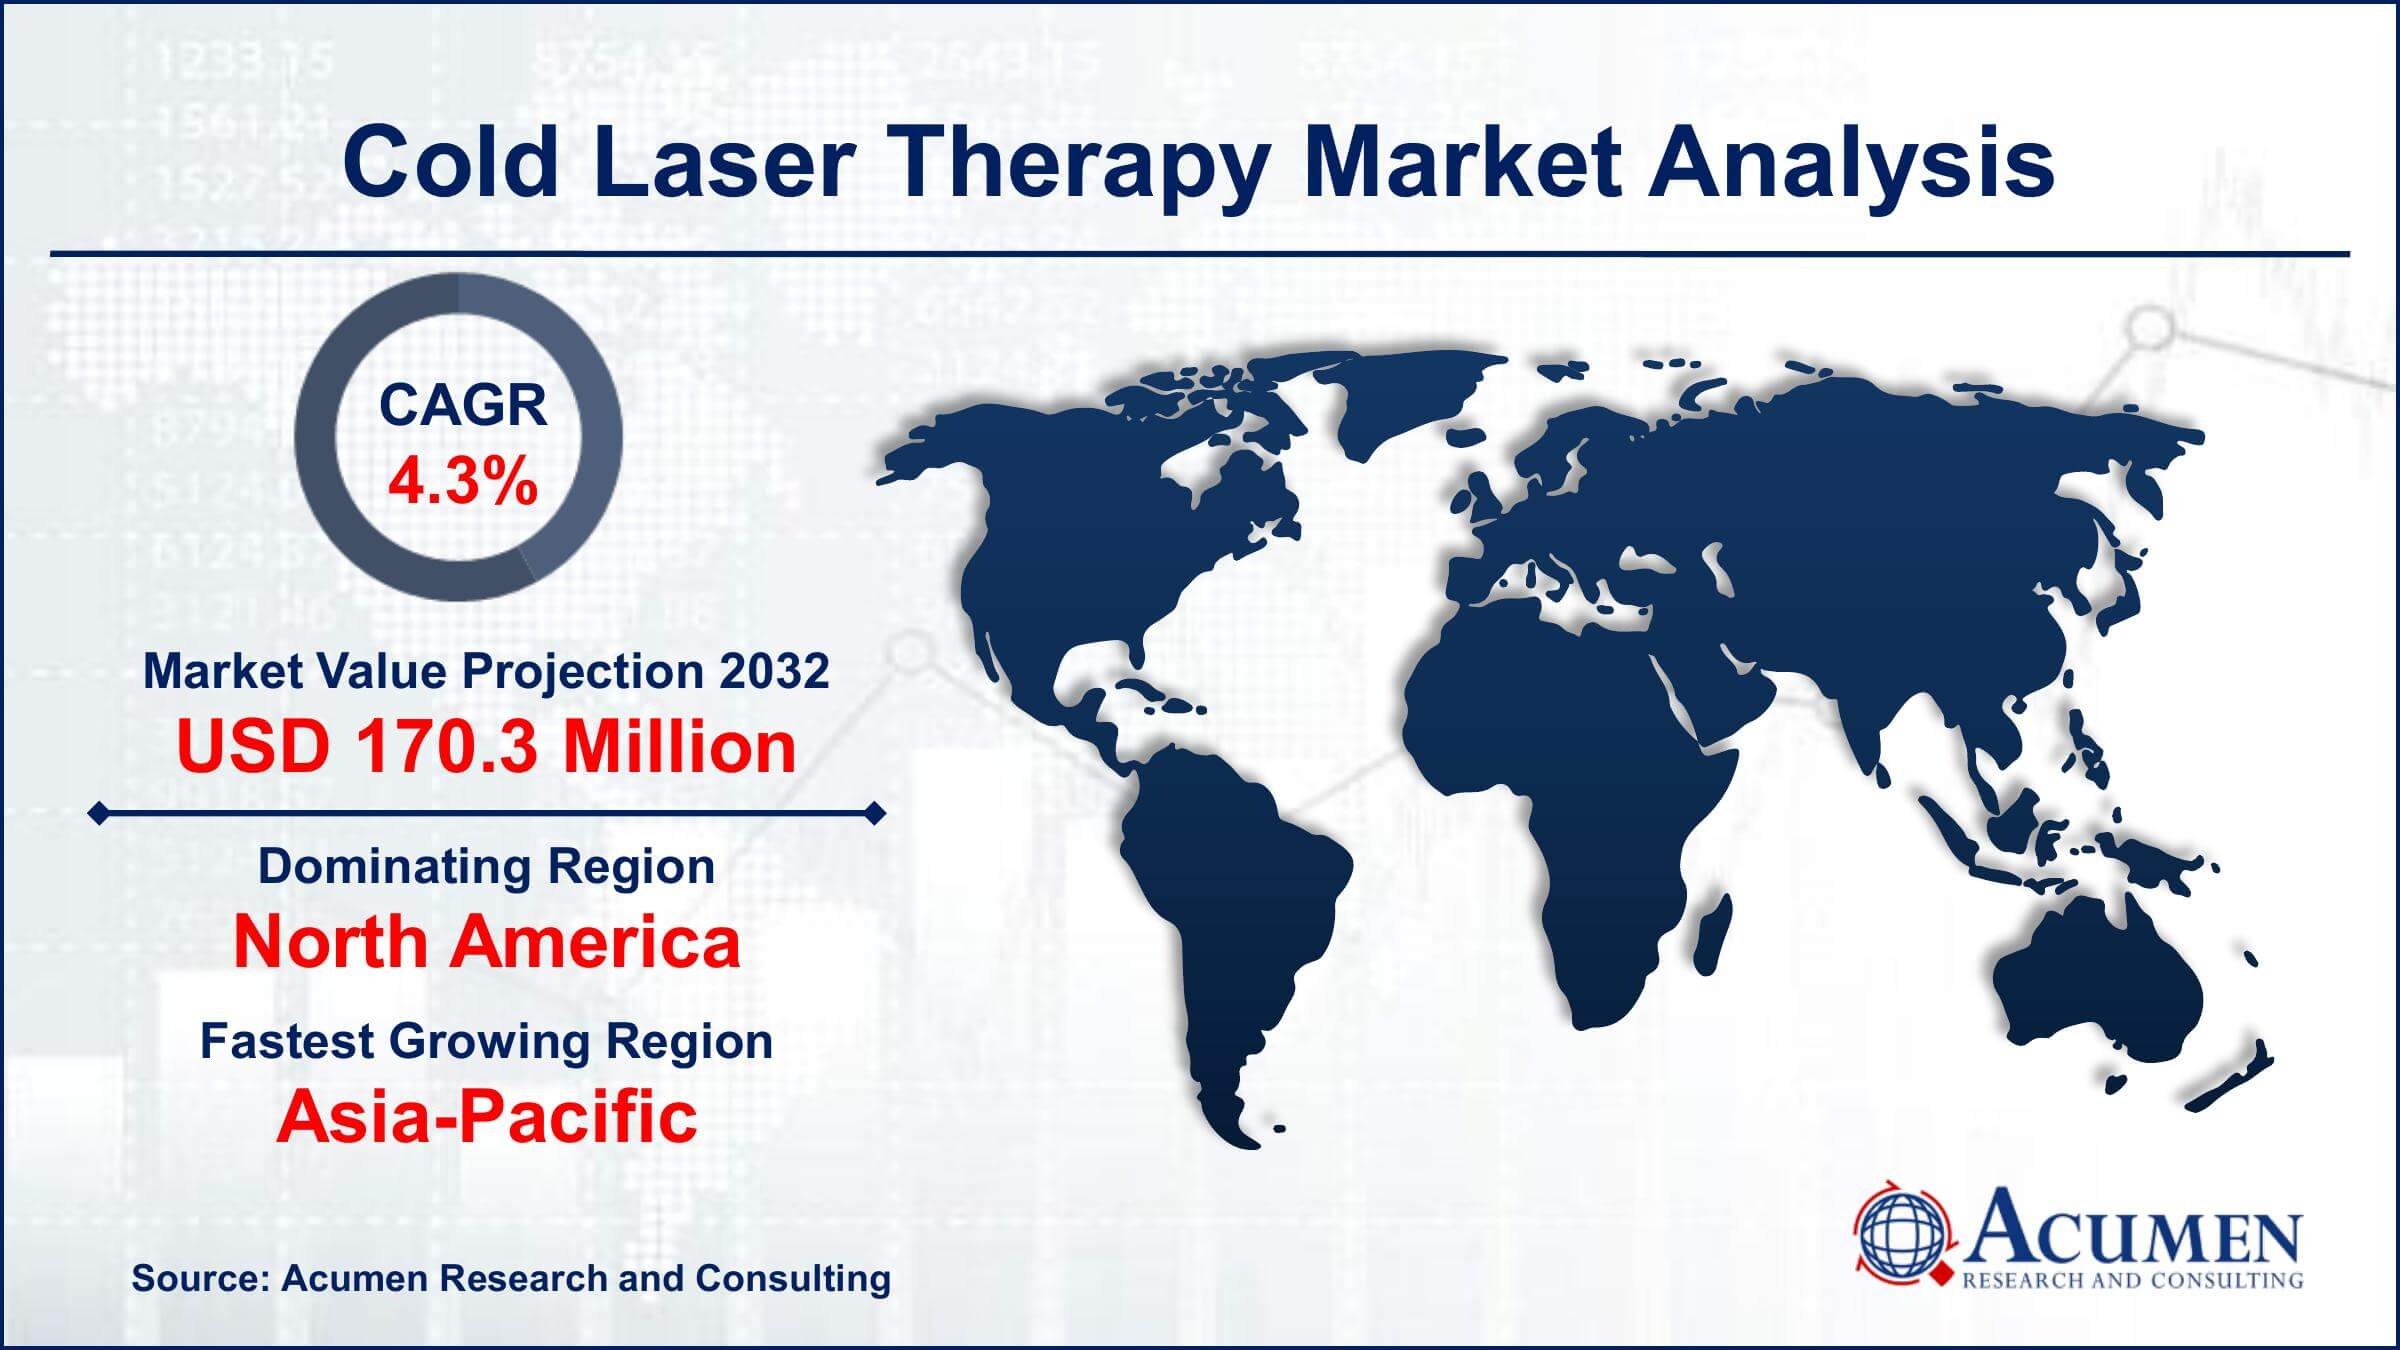 Global Cold Laser Therapy Market Trends